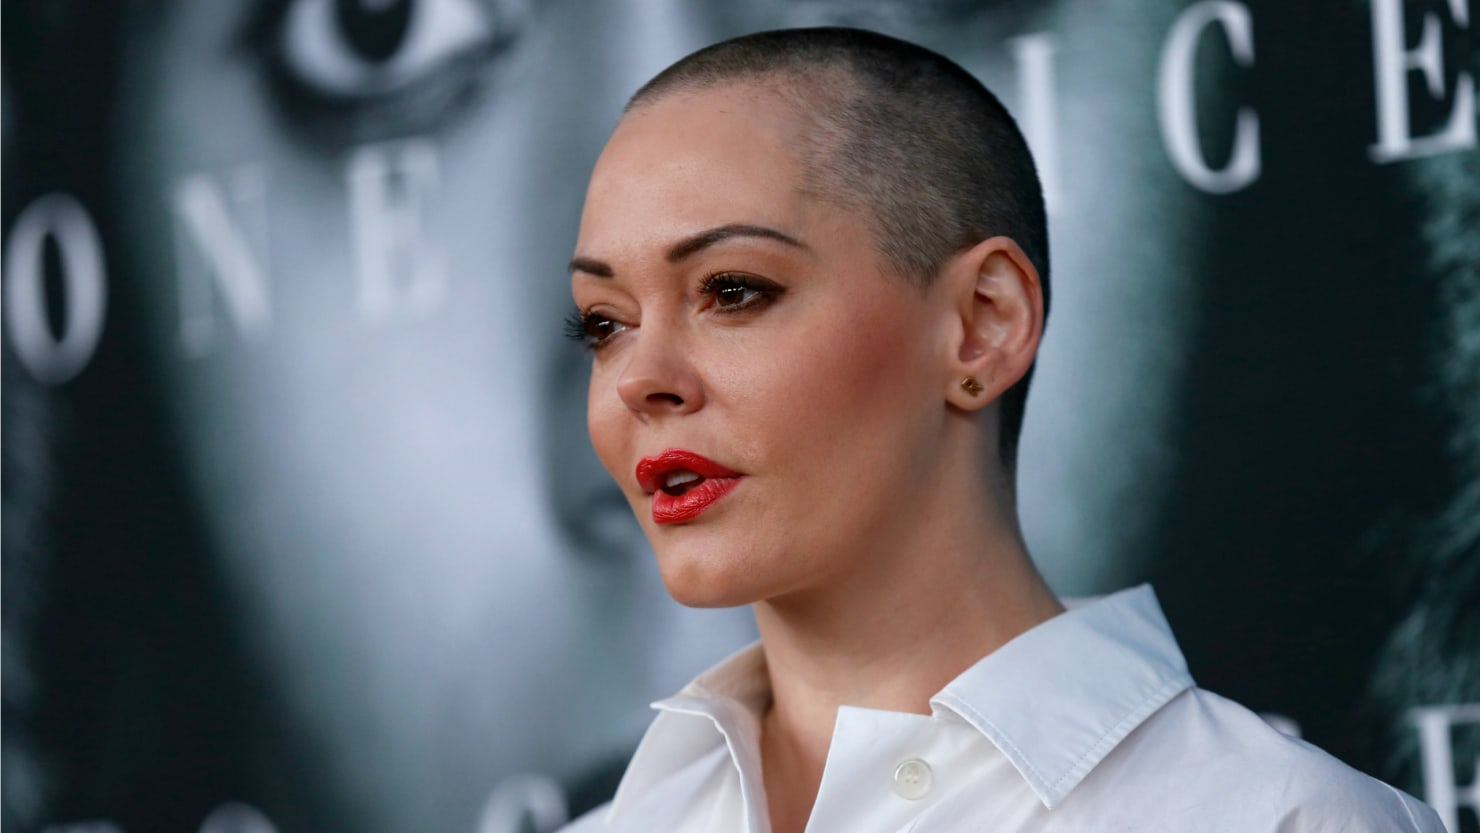 Twitter Suspends Weinstein Victim Rose McGowan for Speaking Out Too Strongly